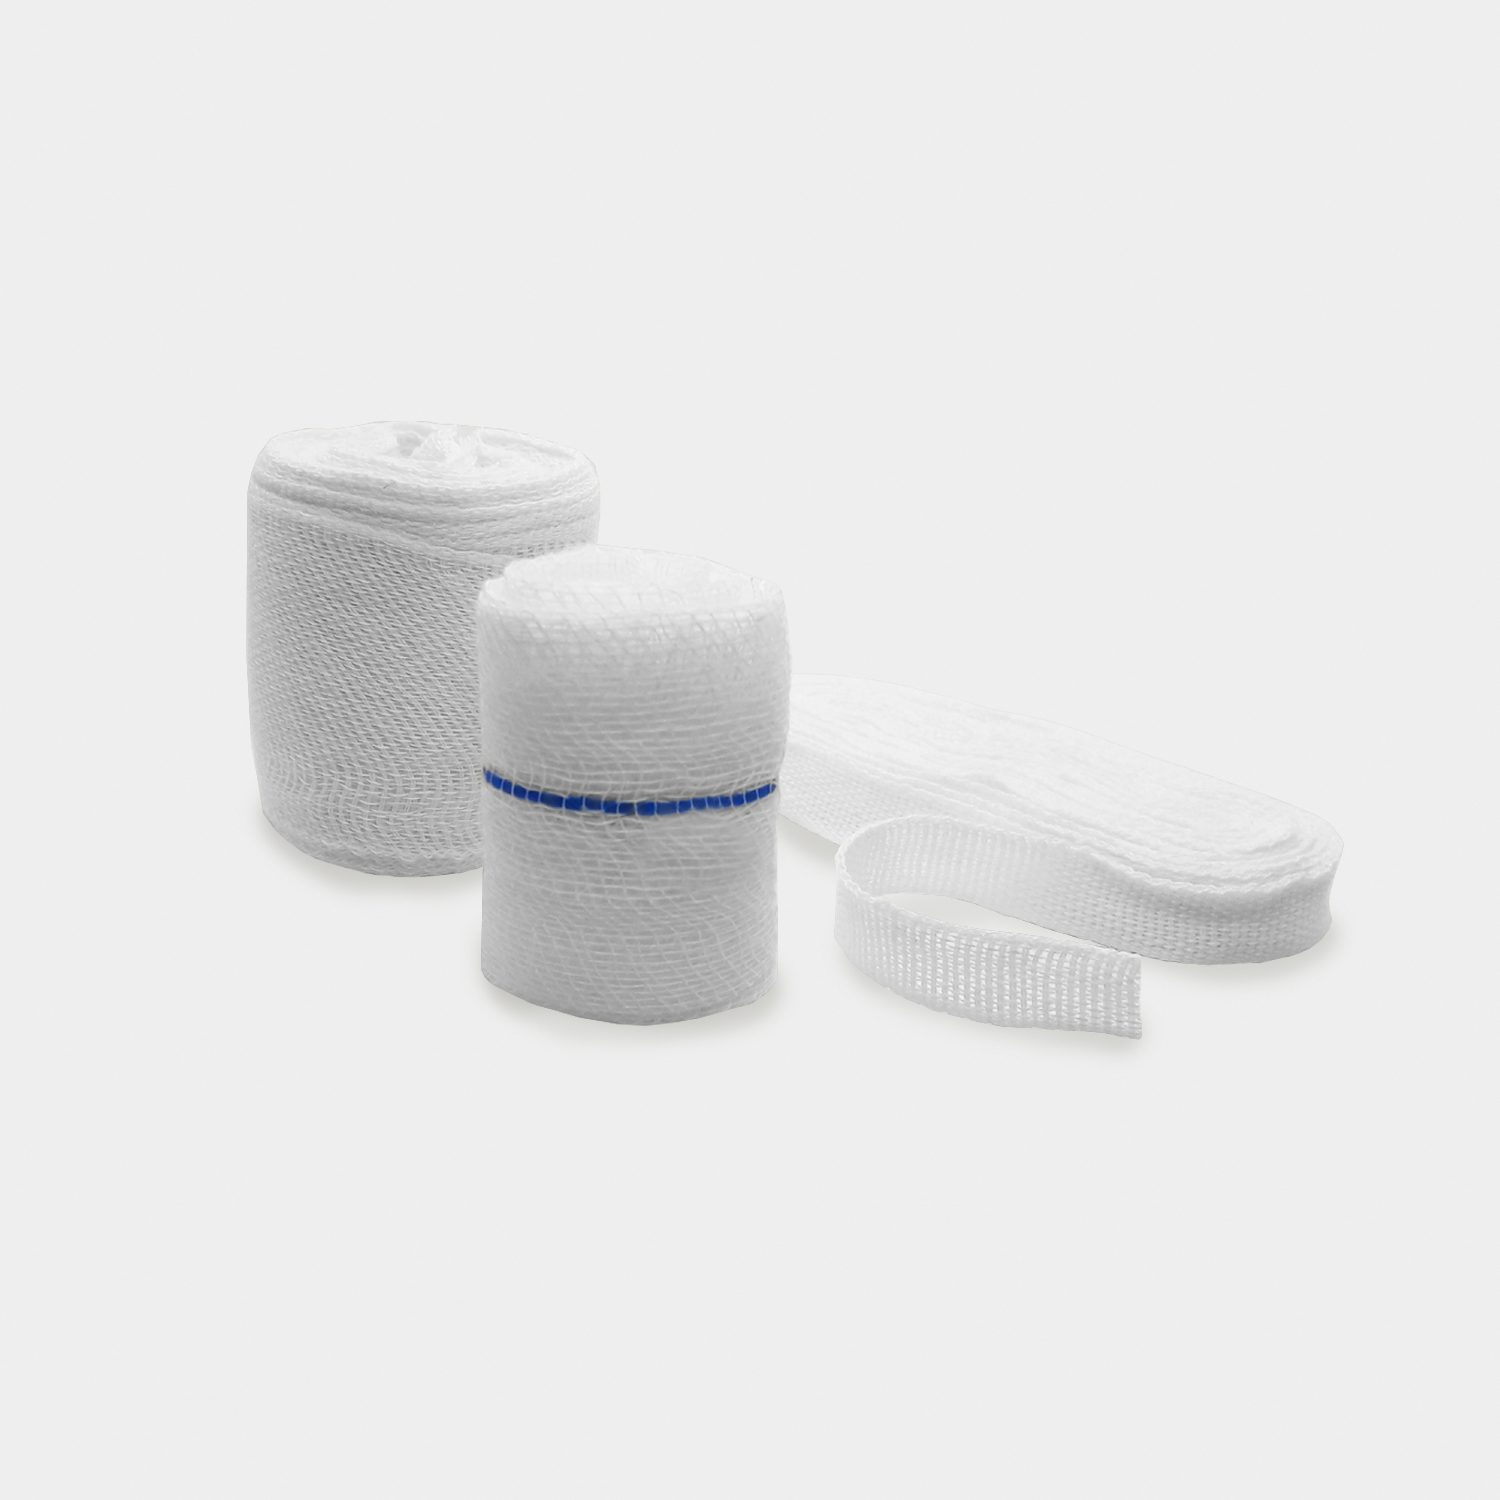 GAUZE PACKING / THROAT PACKING / WOUND PACKING